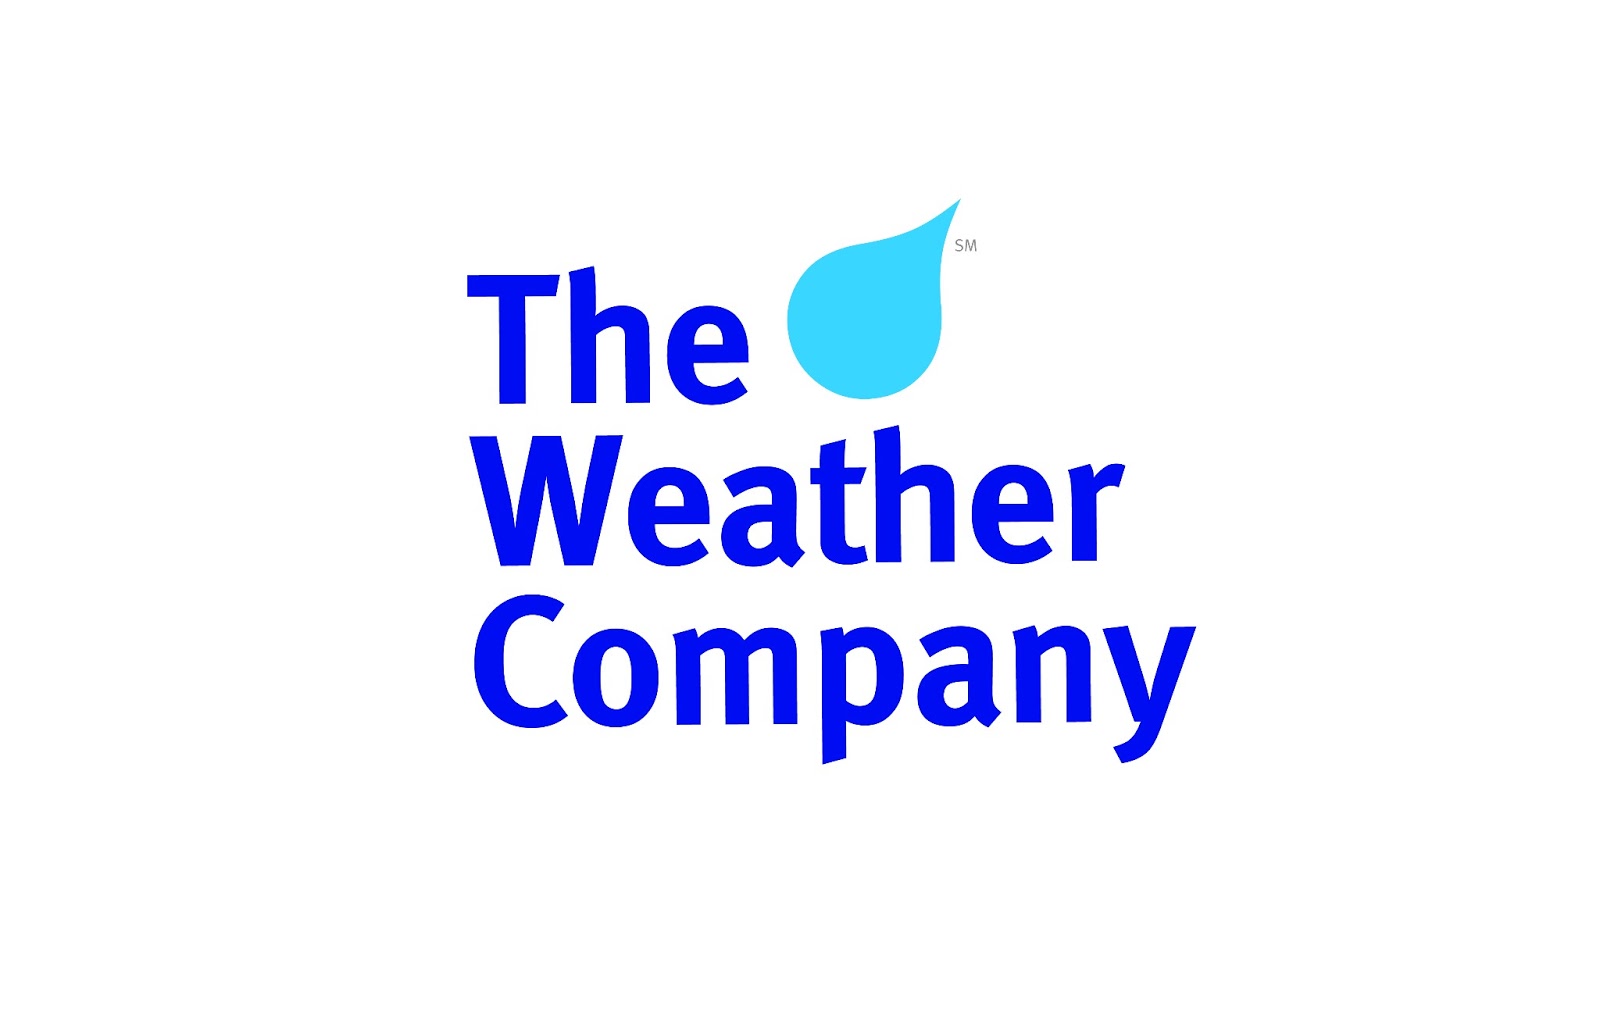 Weather Underground Takes Over The Weather Channel in New